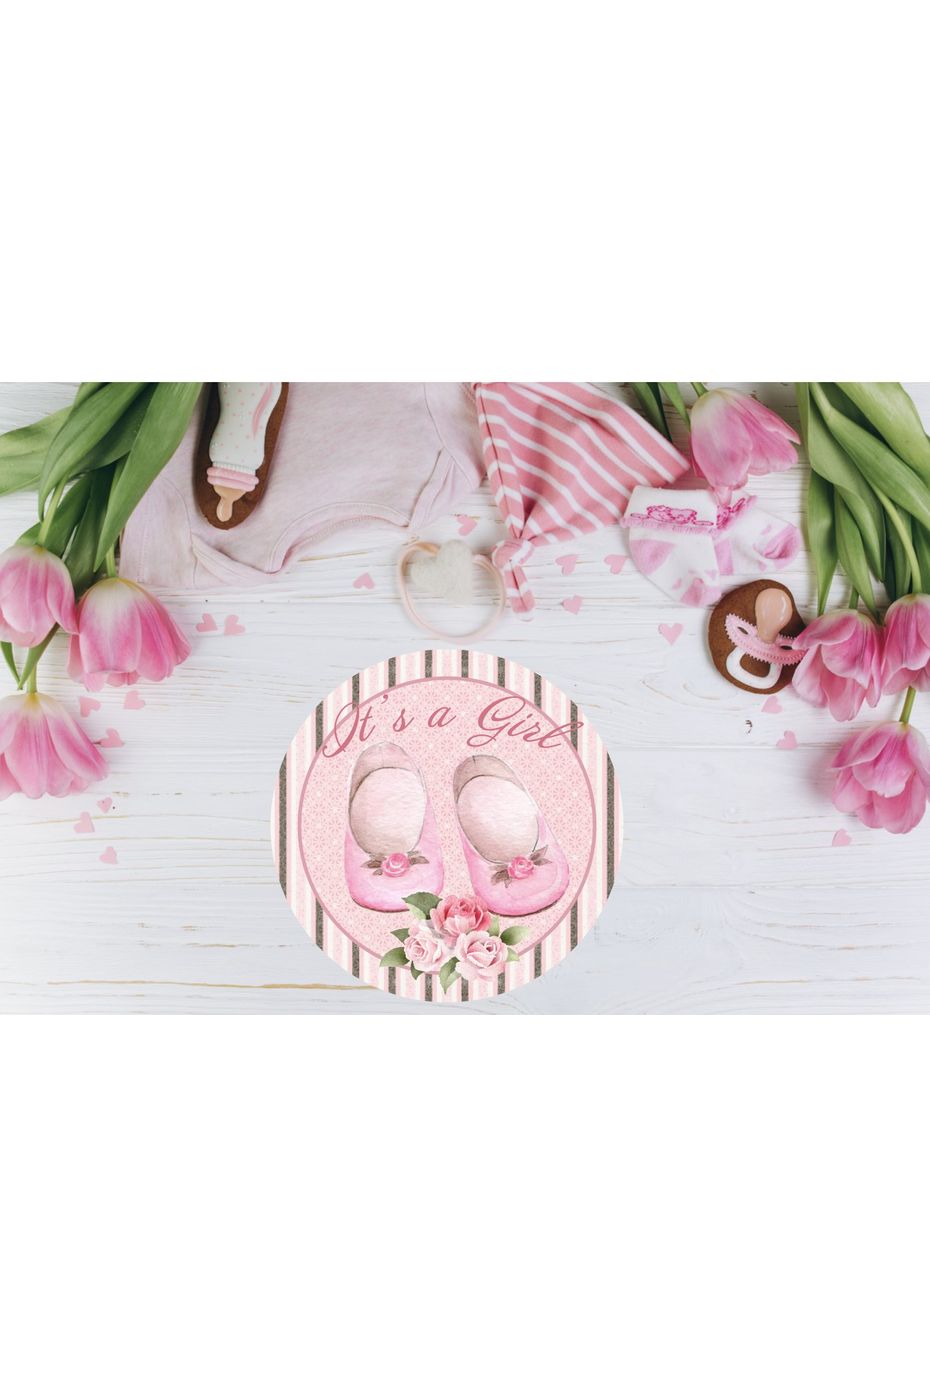 Shop For It's a Girl Baby Shoes Round Sign - Wreath Enhancement